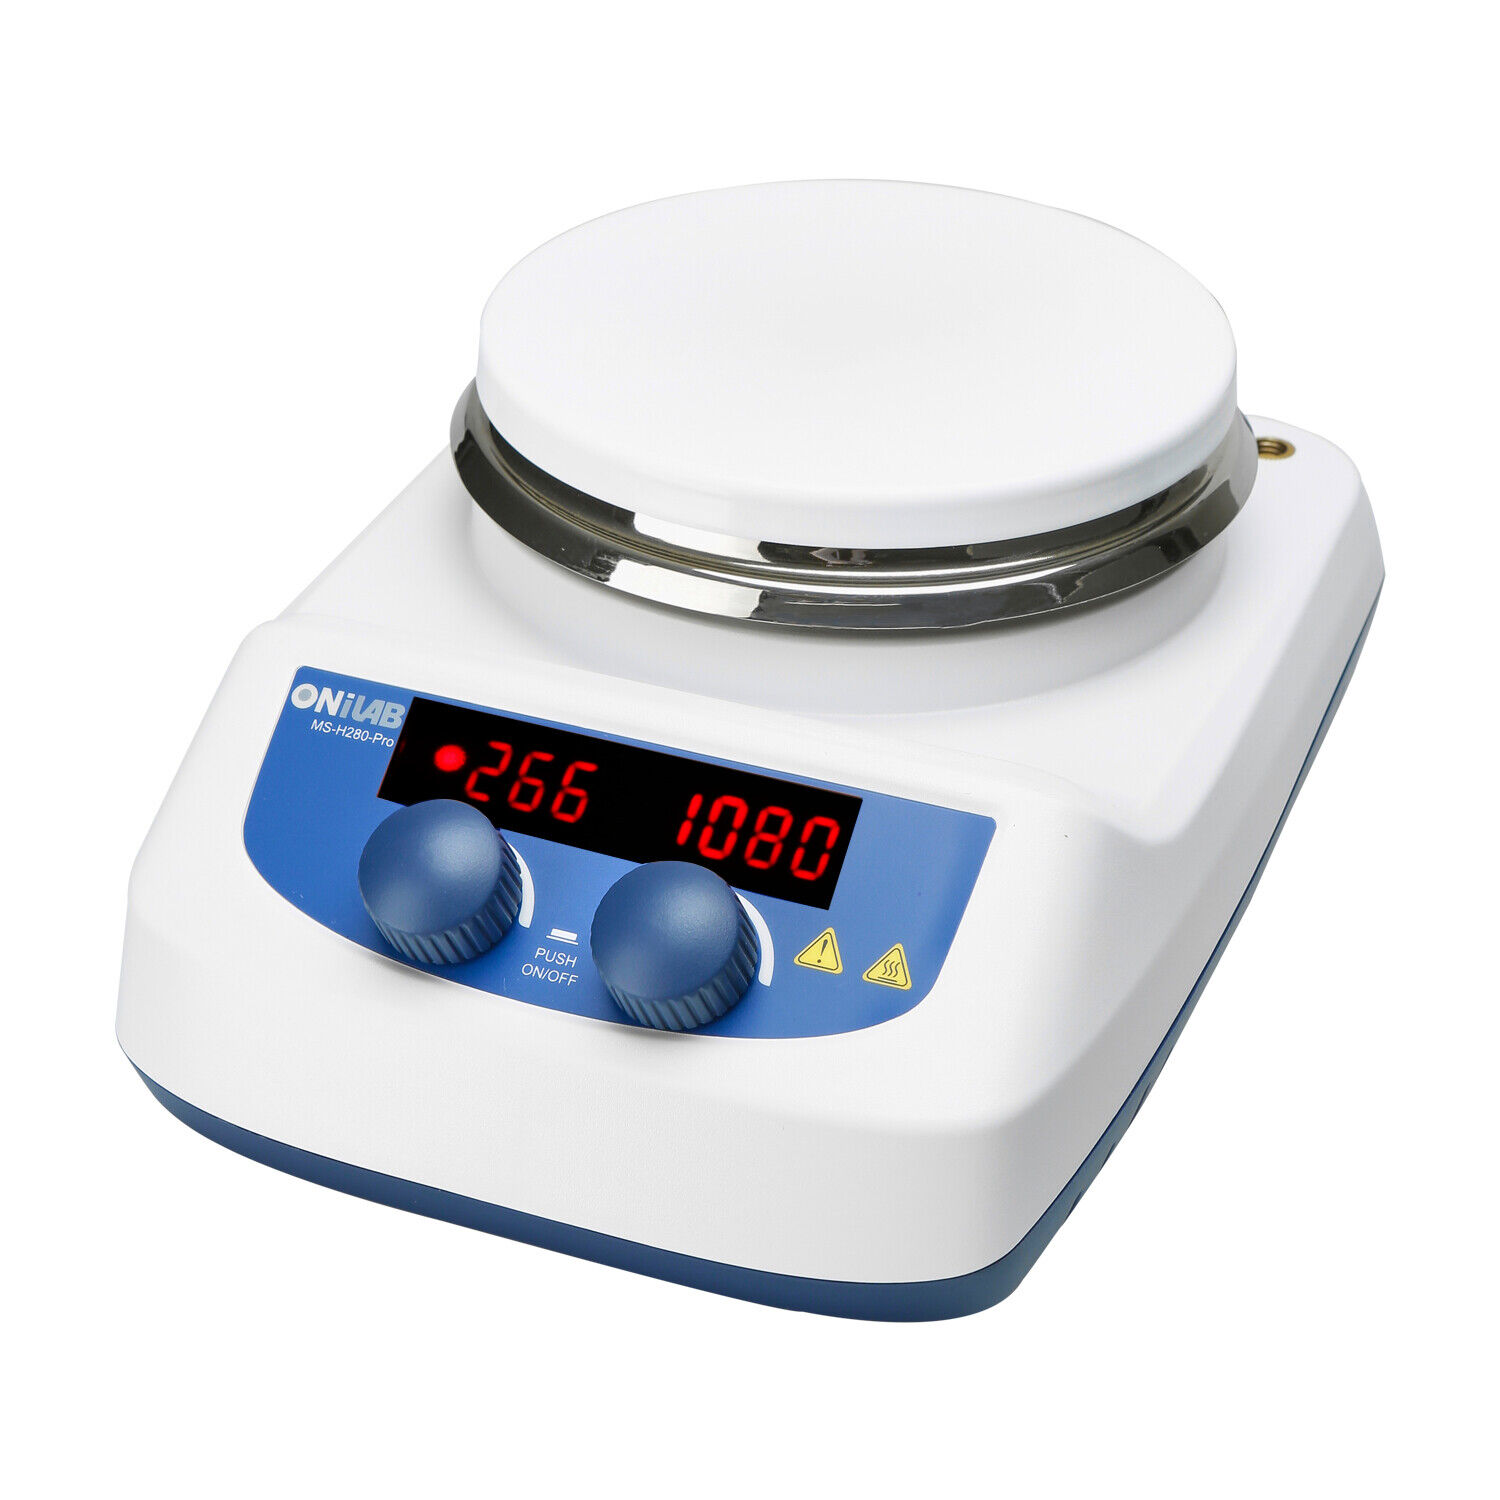 Onilab Magnetic Stirrer with Hot Plate Digital Lab Magnetic Mixer And stir bar